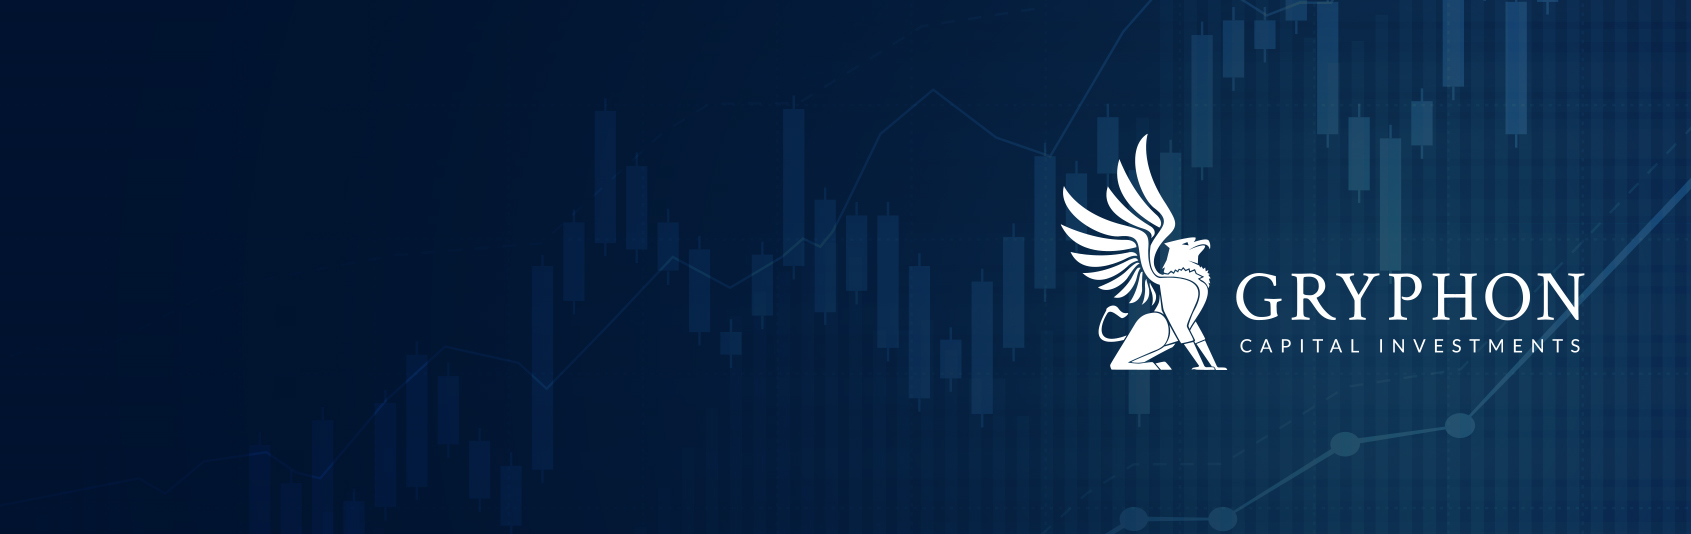 Gryphon Capital Investiments in 2014